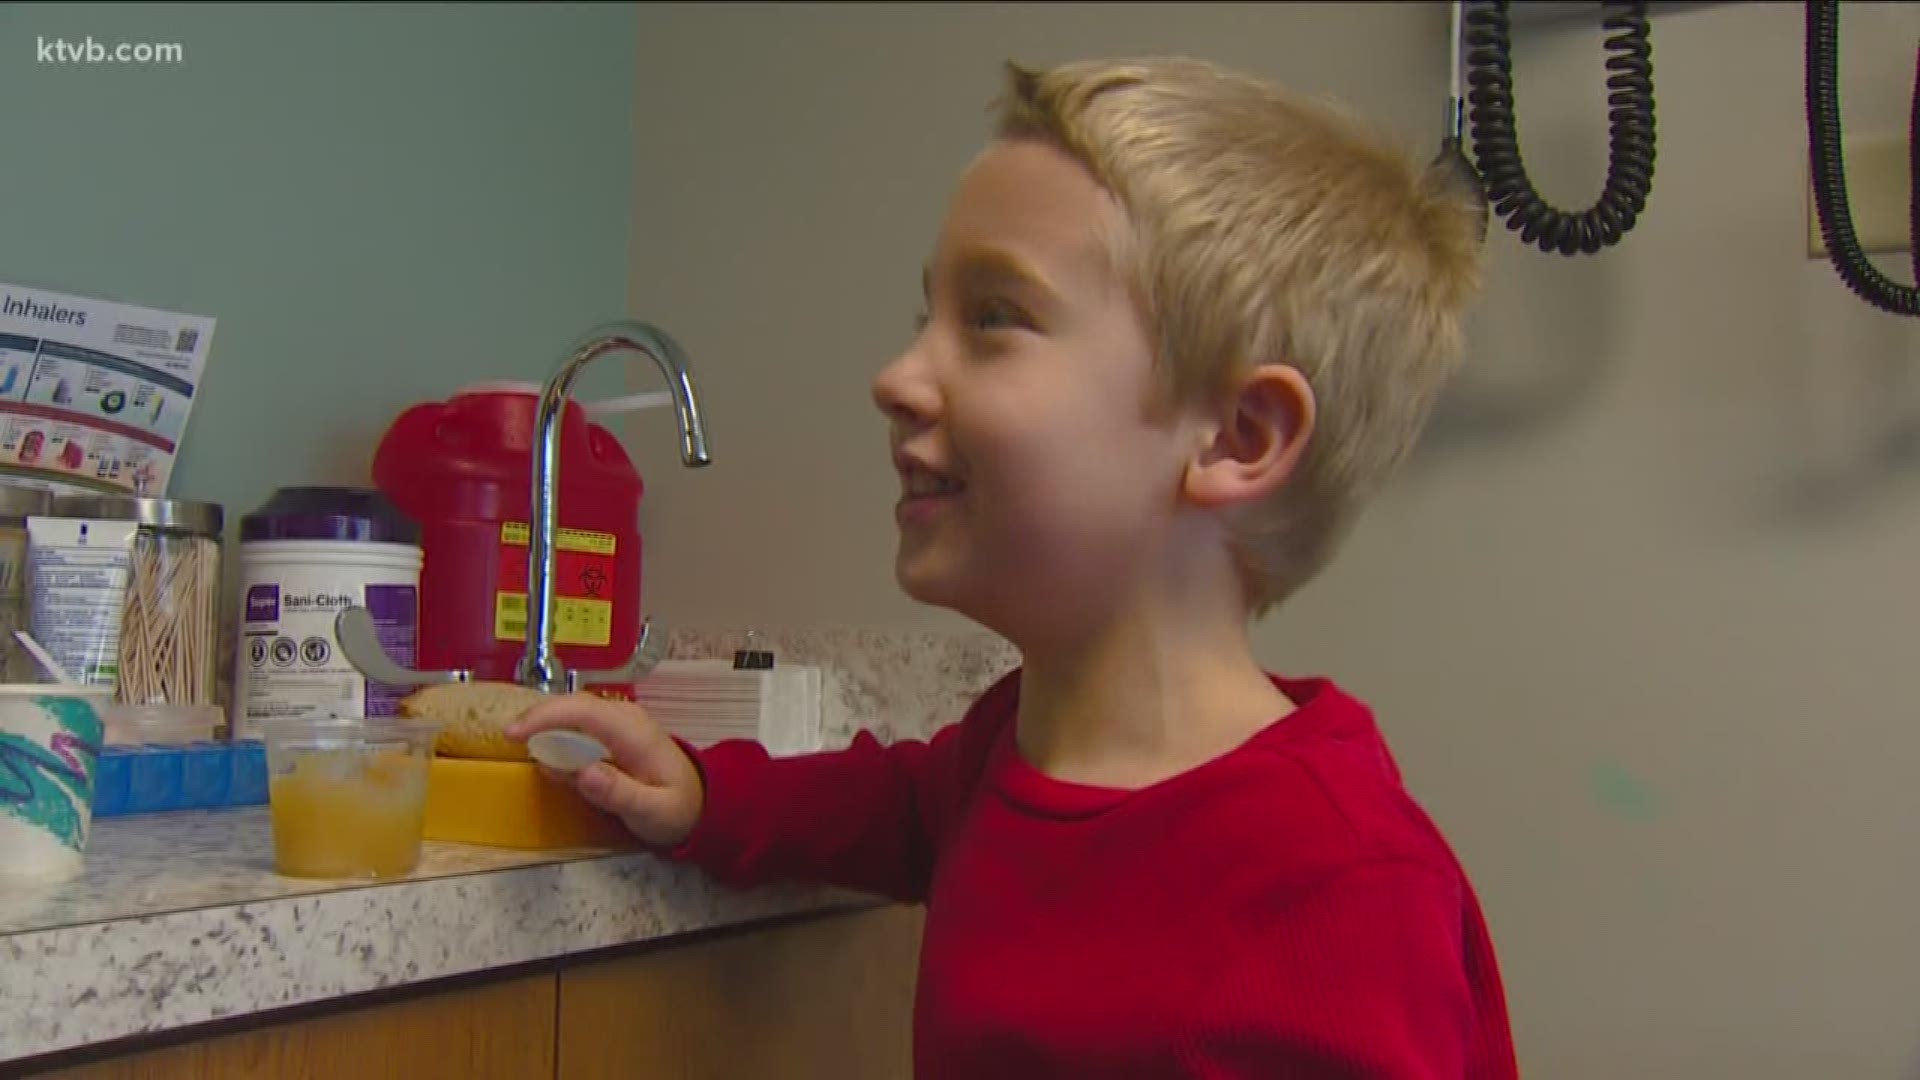 The five-month treatment program is helping some children overcome their food allergies.